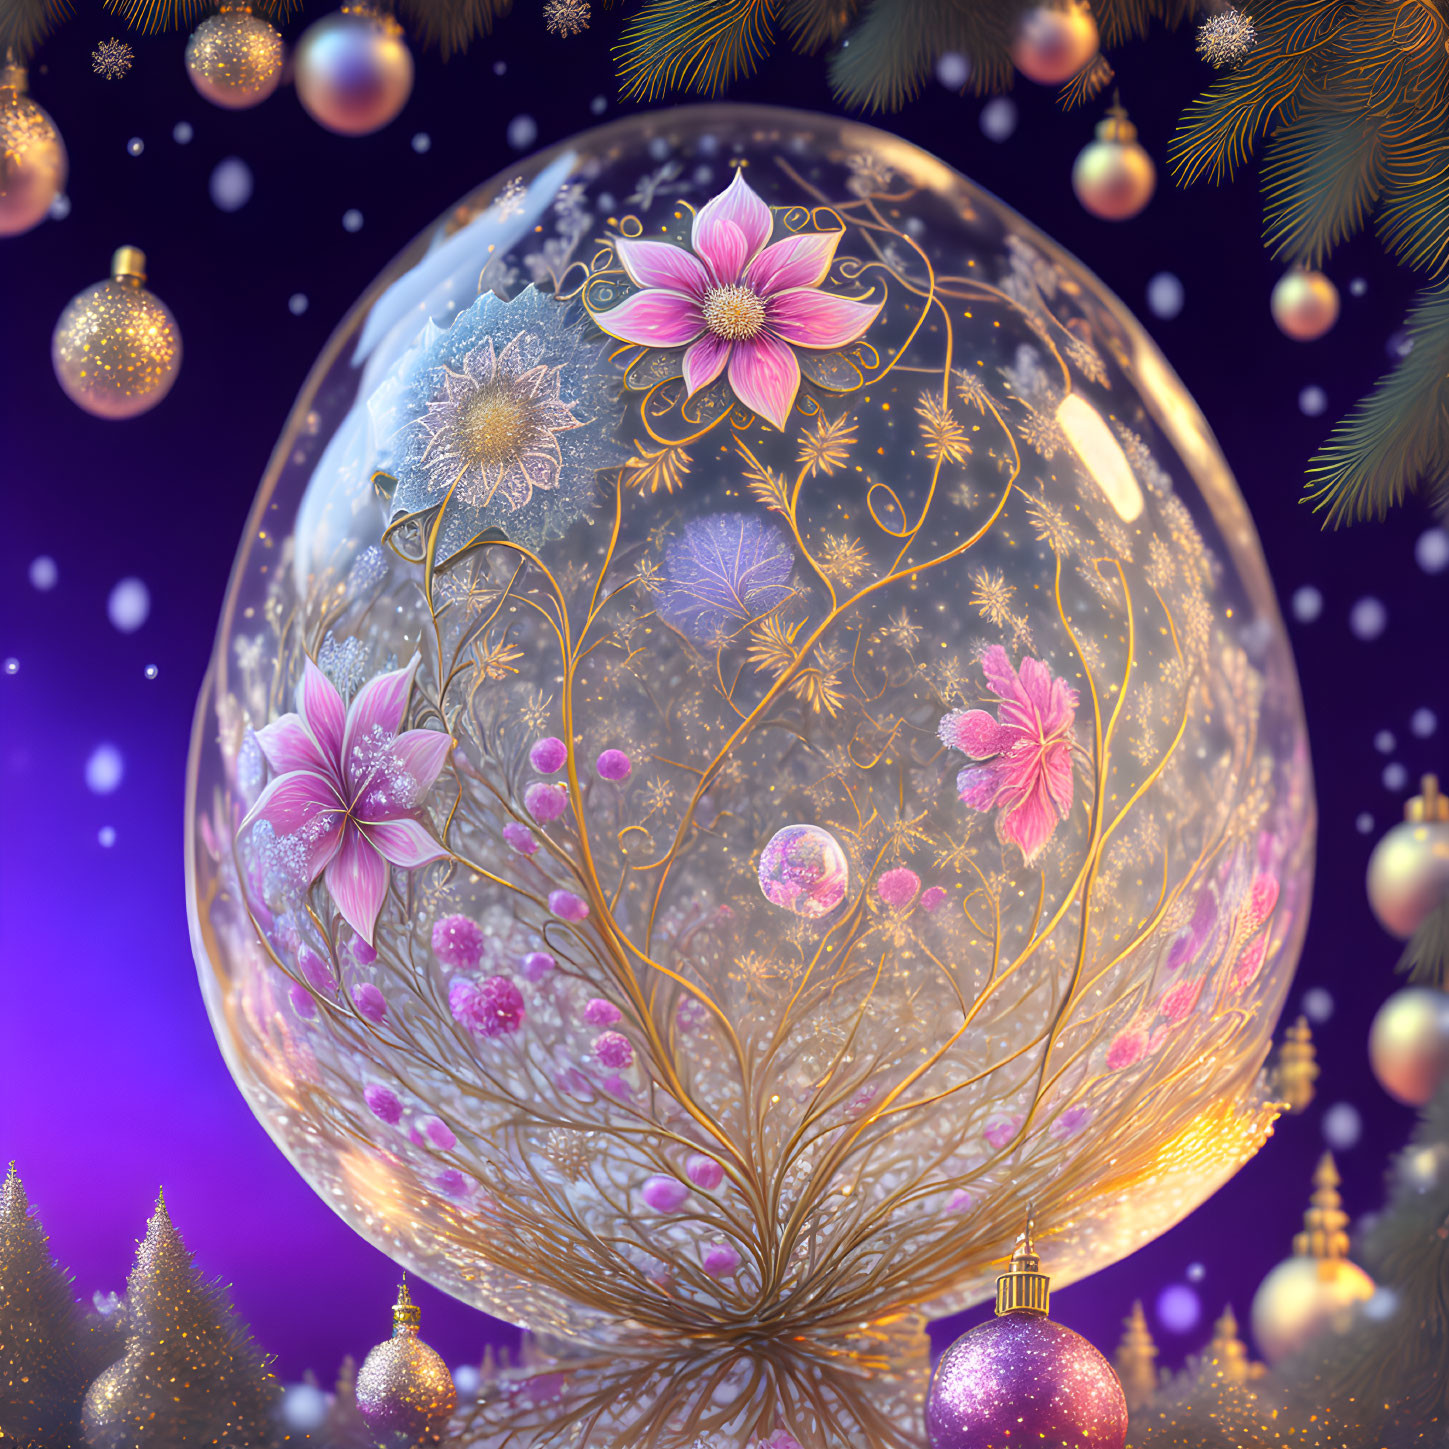 Digital Art: Transparent Holiday Ornament with Floral Patterns and Festive Decorations